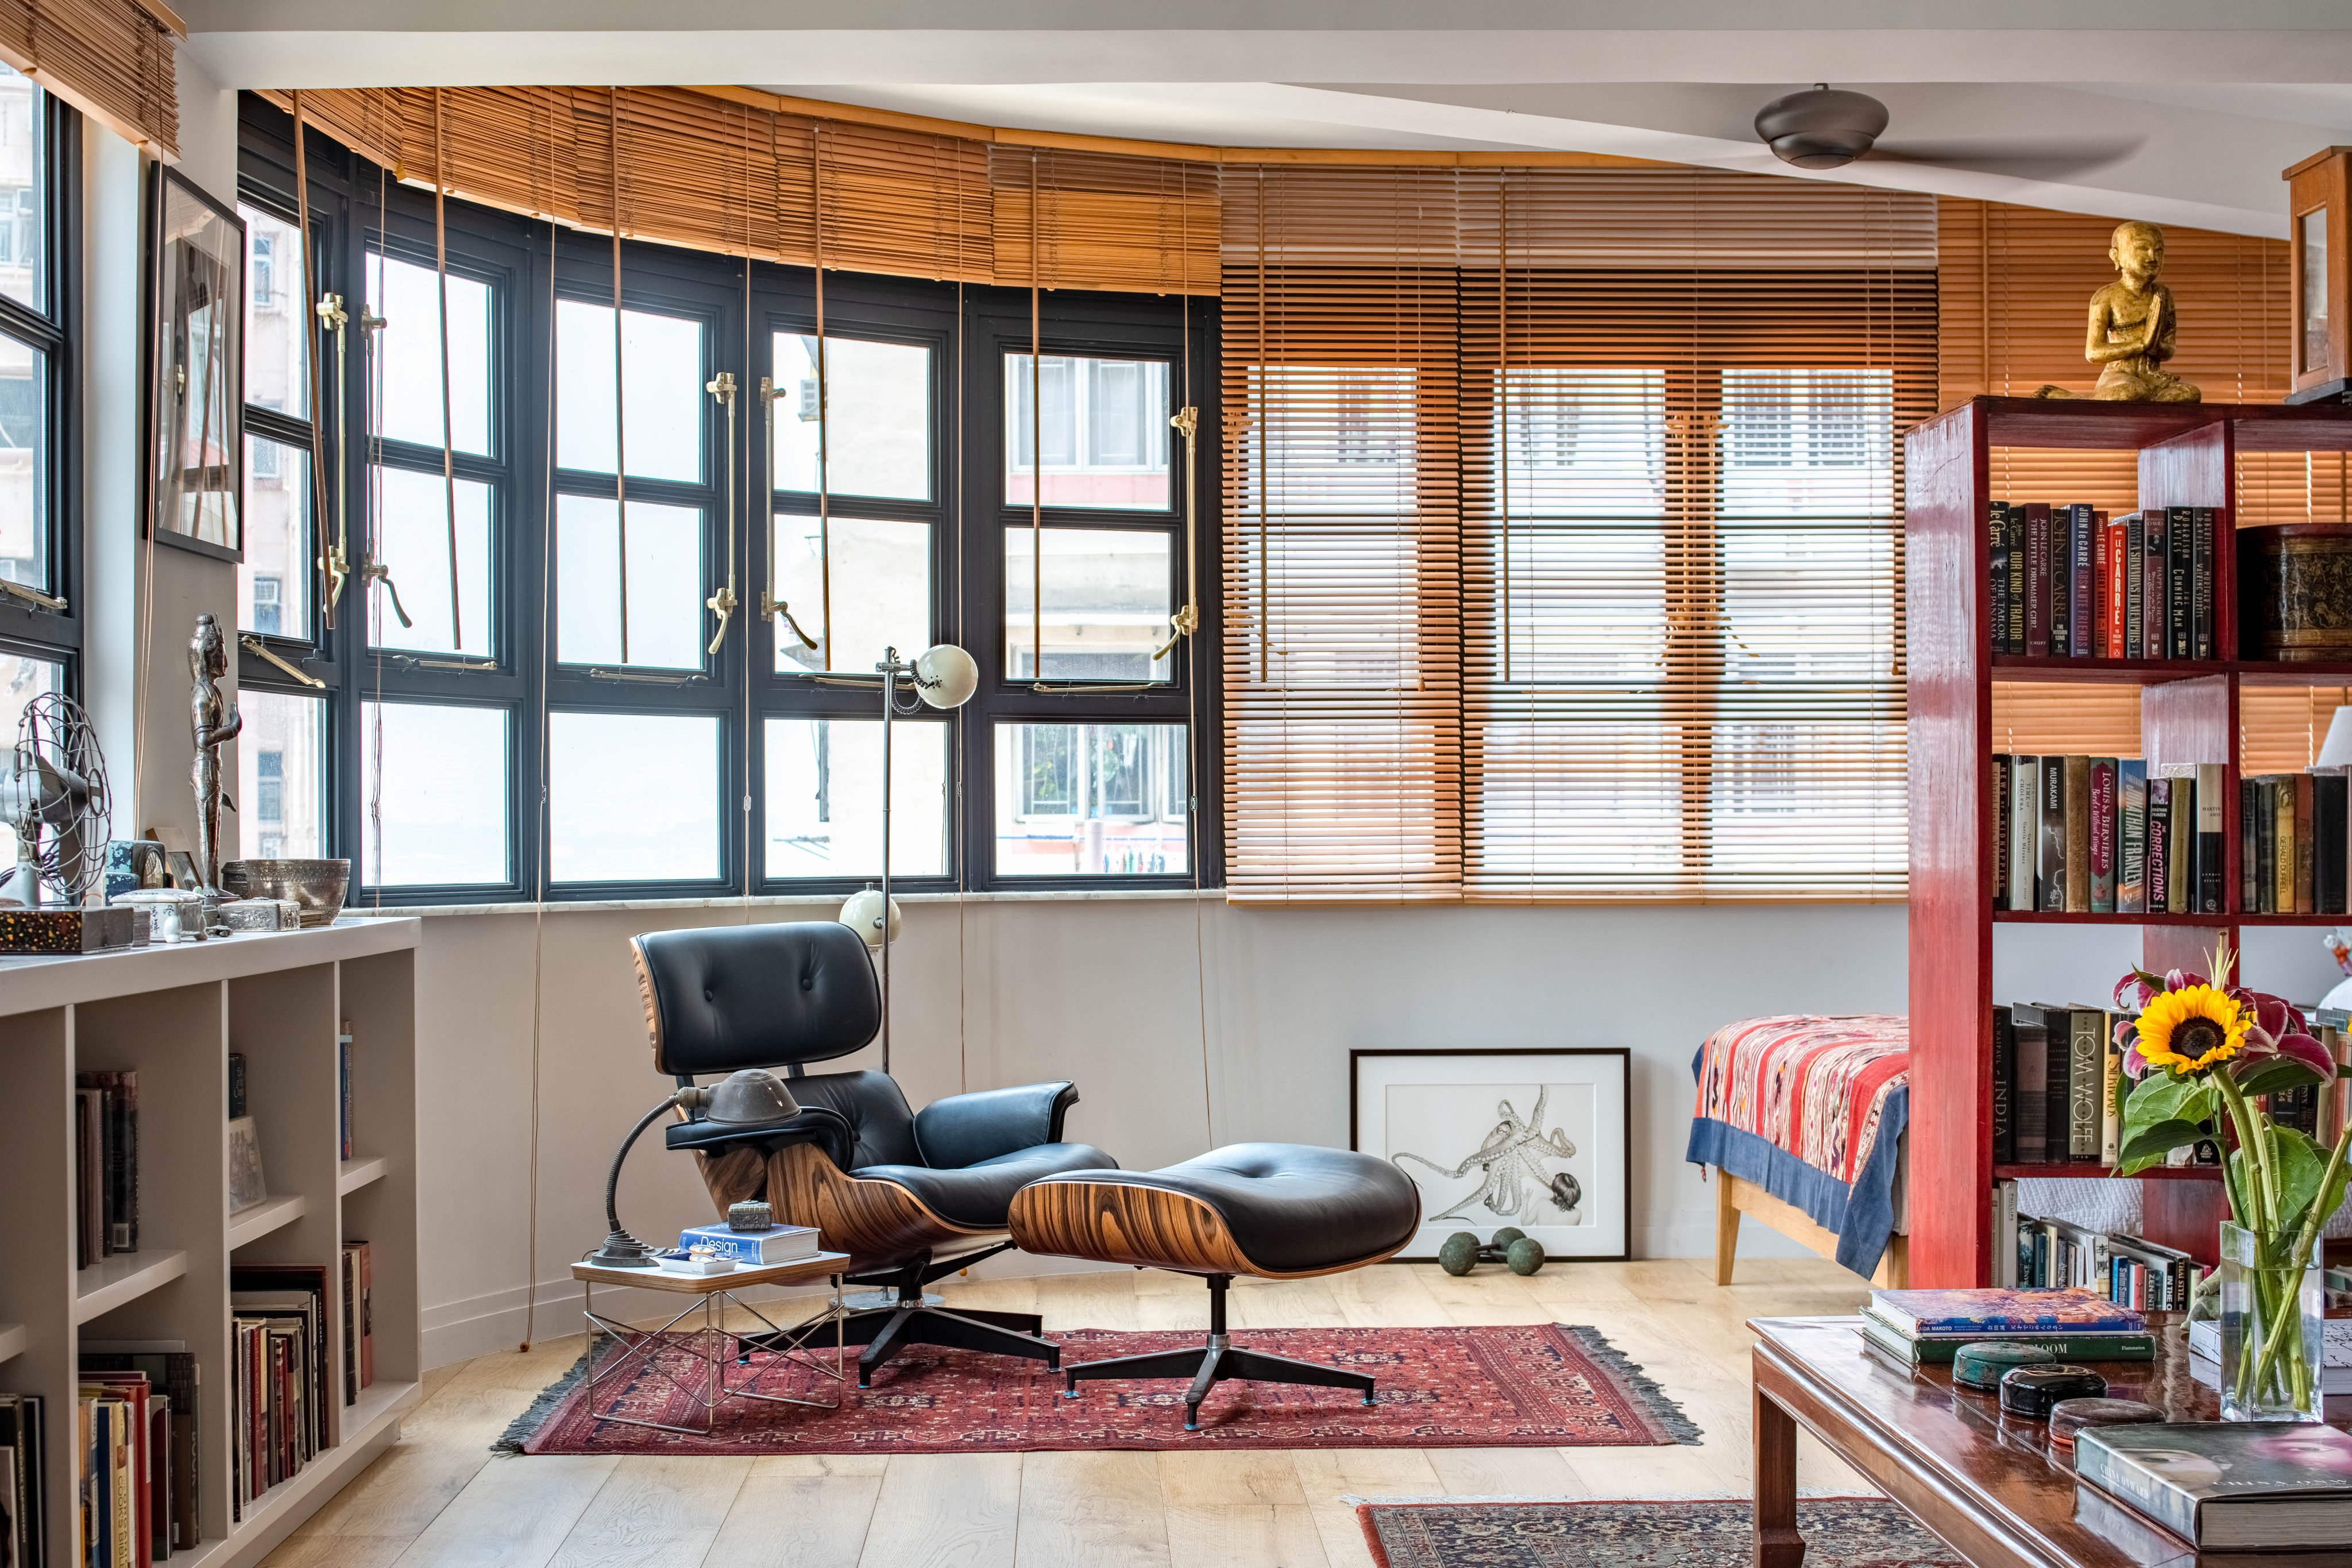 The windows in this refurbished flat in a 1960s corner building in Sai Ying Pun, Hong Kong, offer sweeping views of the neighbourhood and of Victoria Harbour, their steel frames and brass handles a mix of mid-century modern and colonial styles. Photo: Eugene Chan